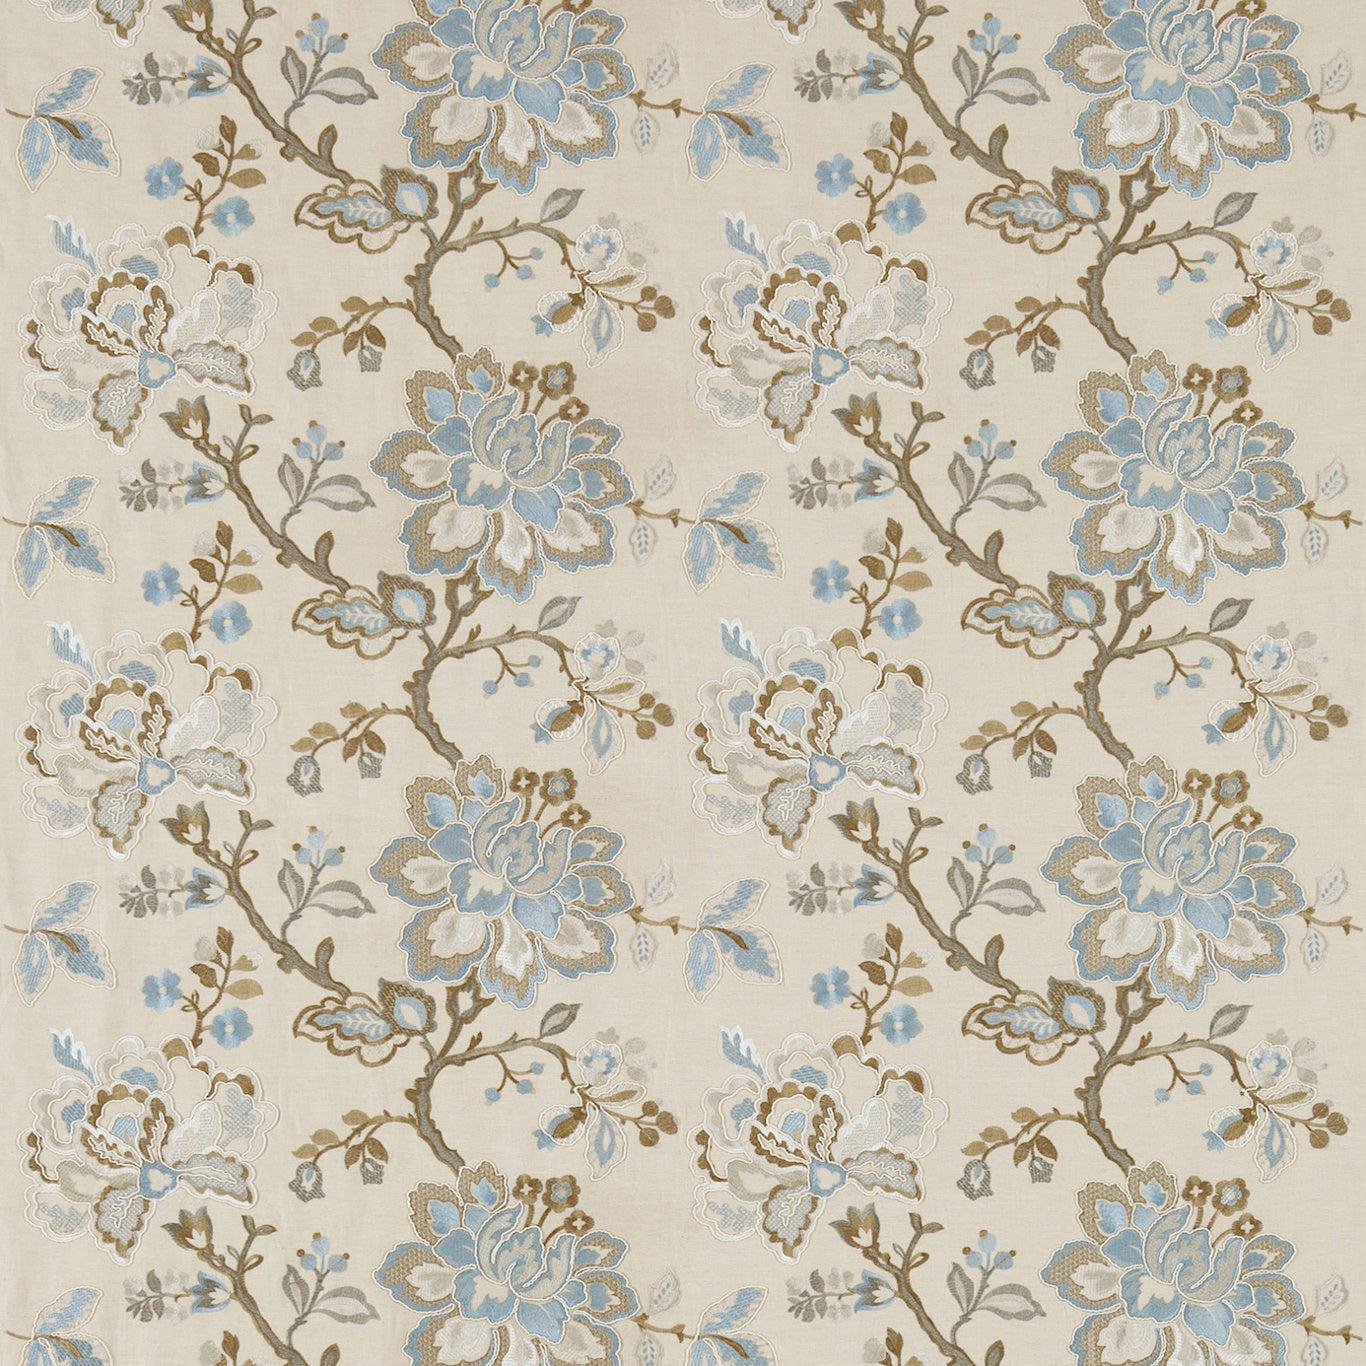 Angelique Fabric by Sanderson - DFAB233996 - Wedgwood/Sable